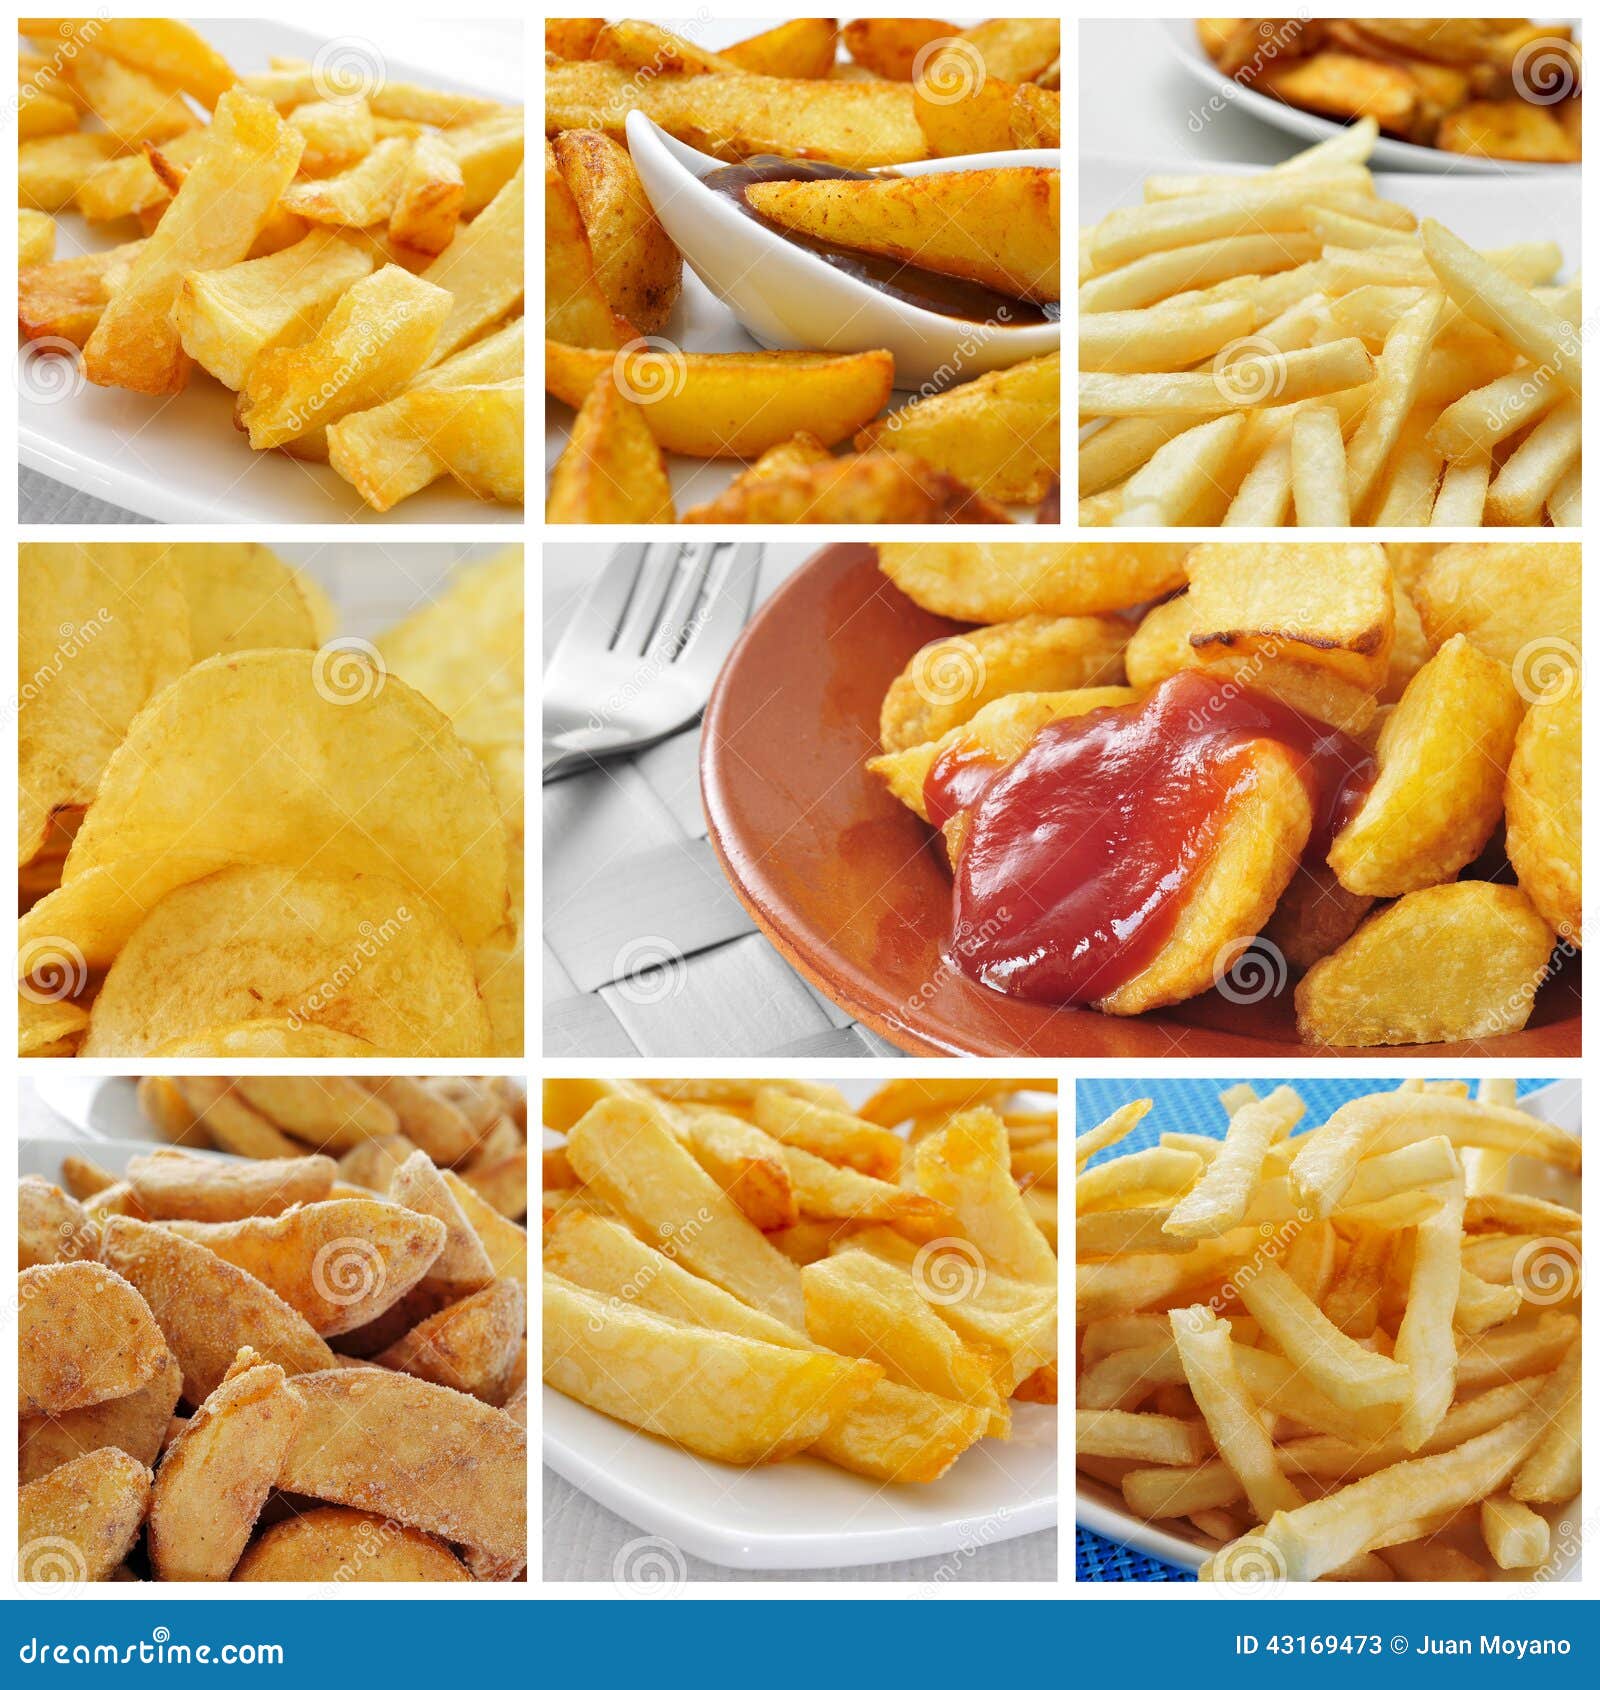 Fried potatoes collage stock image. Image of collage - 43169473